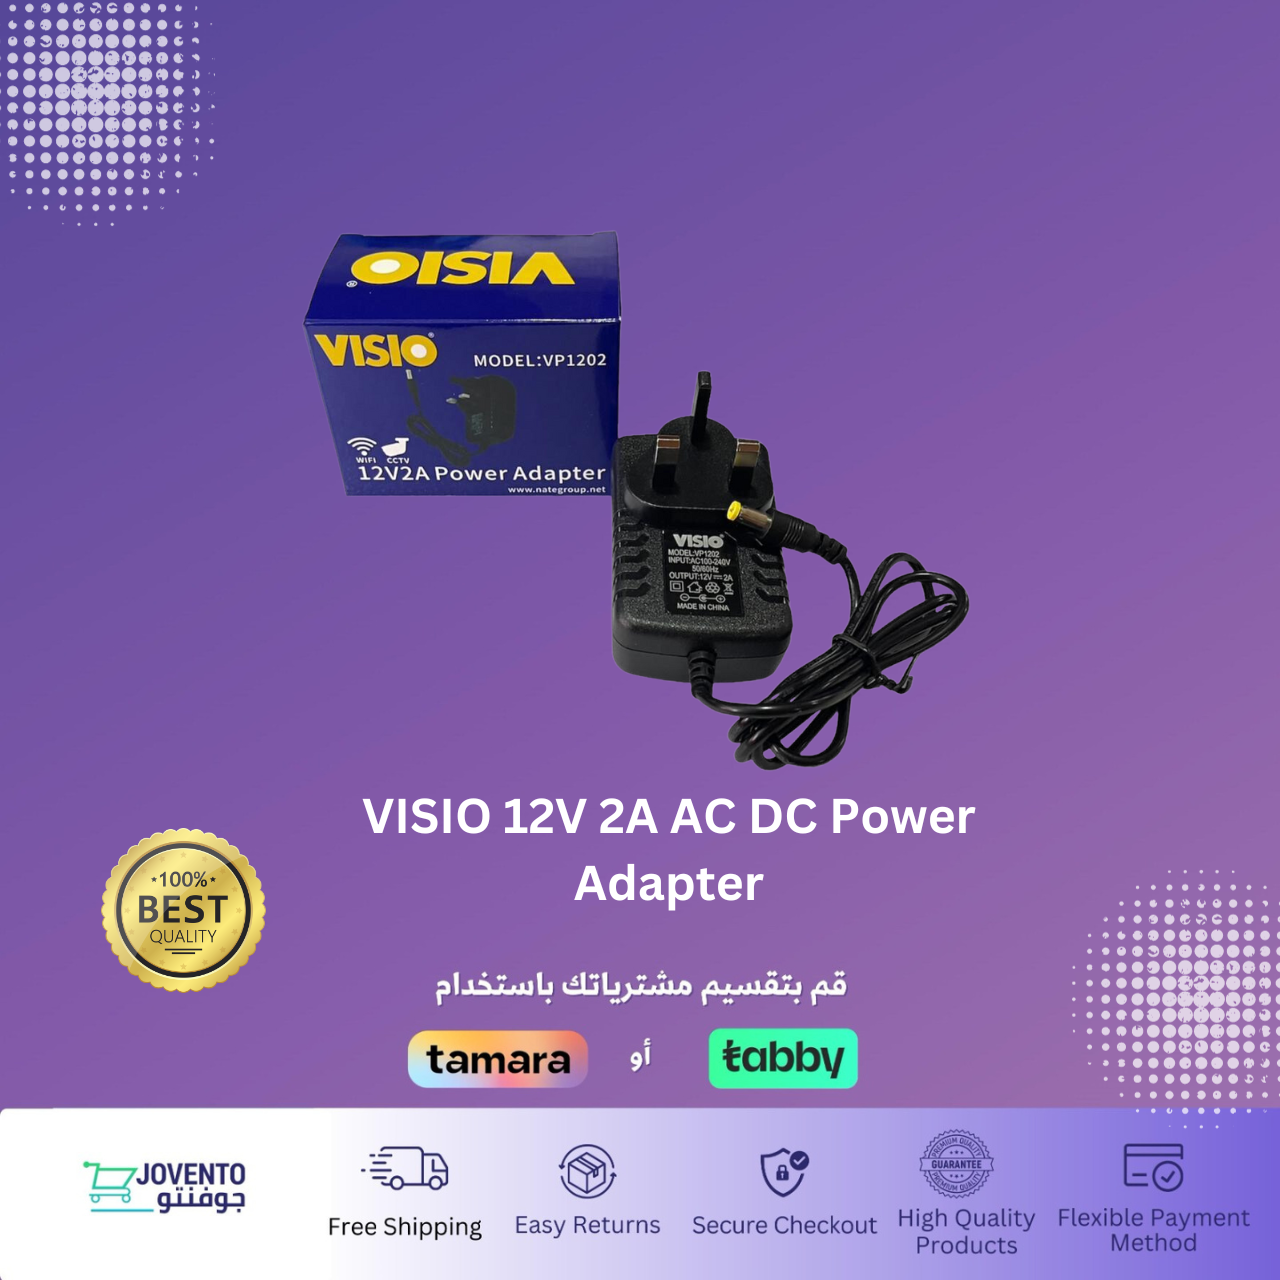 VISIO 12V 2A AC DC Power Adapter